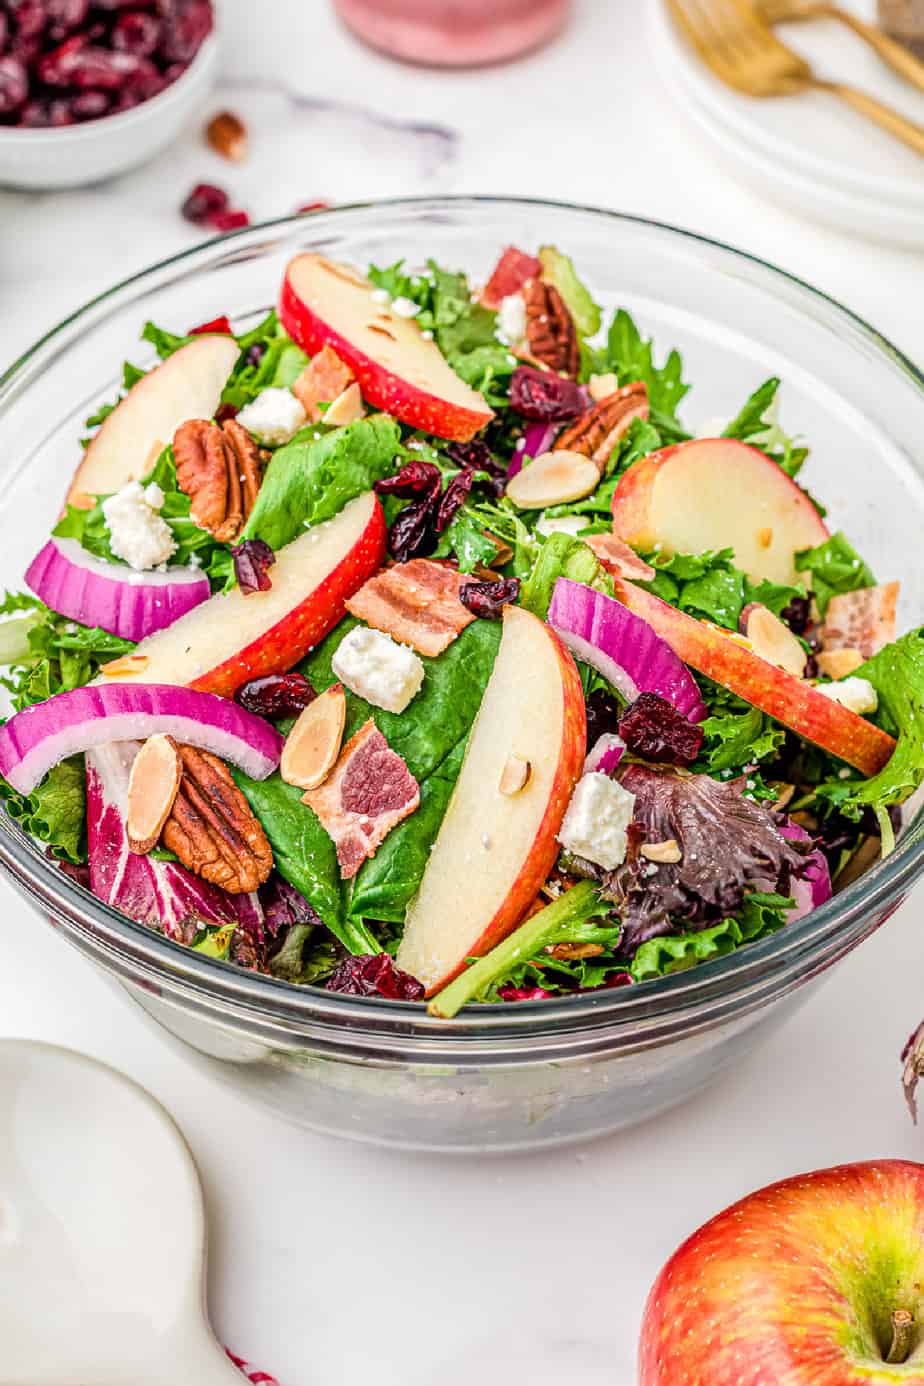 Large bowl of salad from the side on a table topped with apple slices, dried cranberries, pecans, onions and feta cheese with serving utensils and extra ingredients next to the bowl on the table.